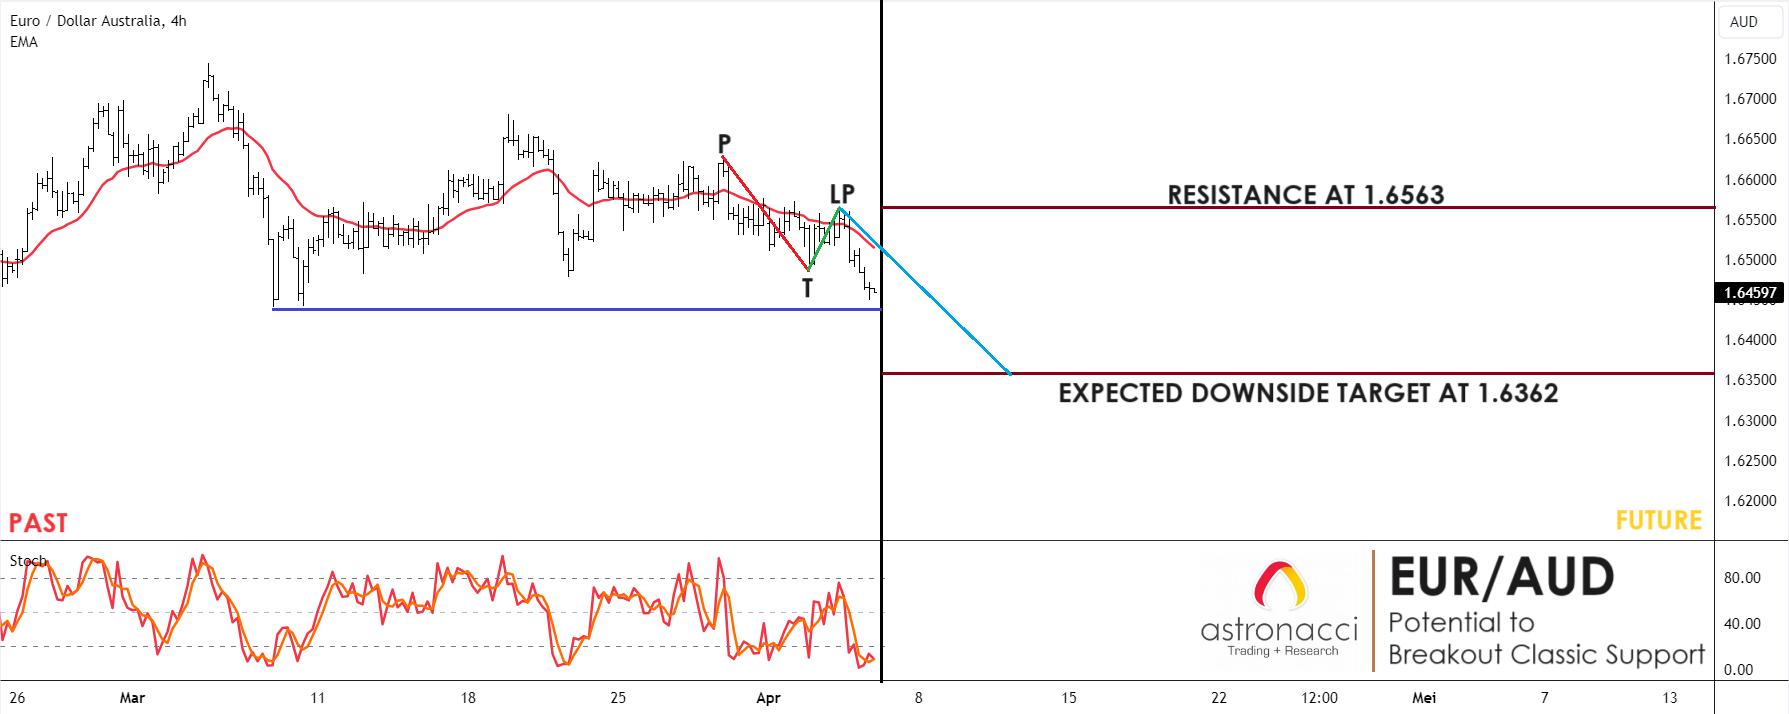 POTENTIAL TO BREAKOUT SUPPORT IN EUR/AUD